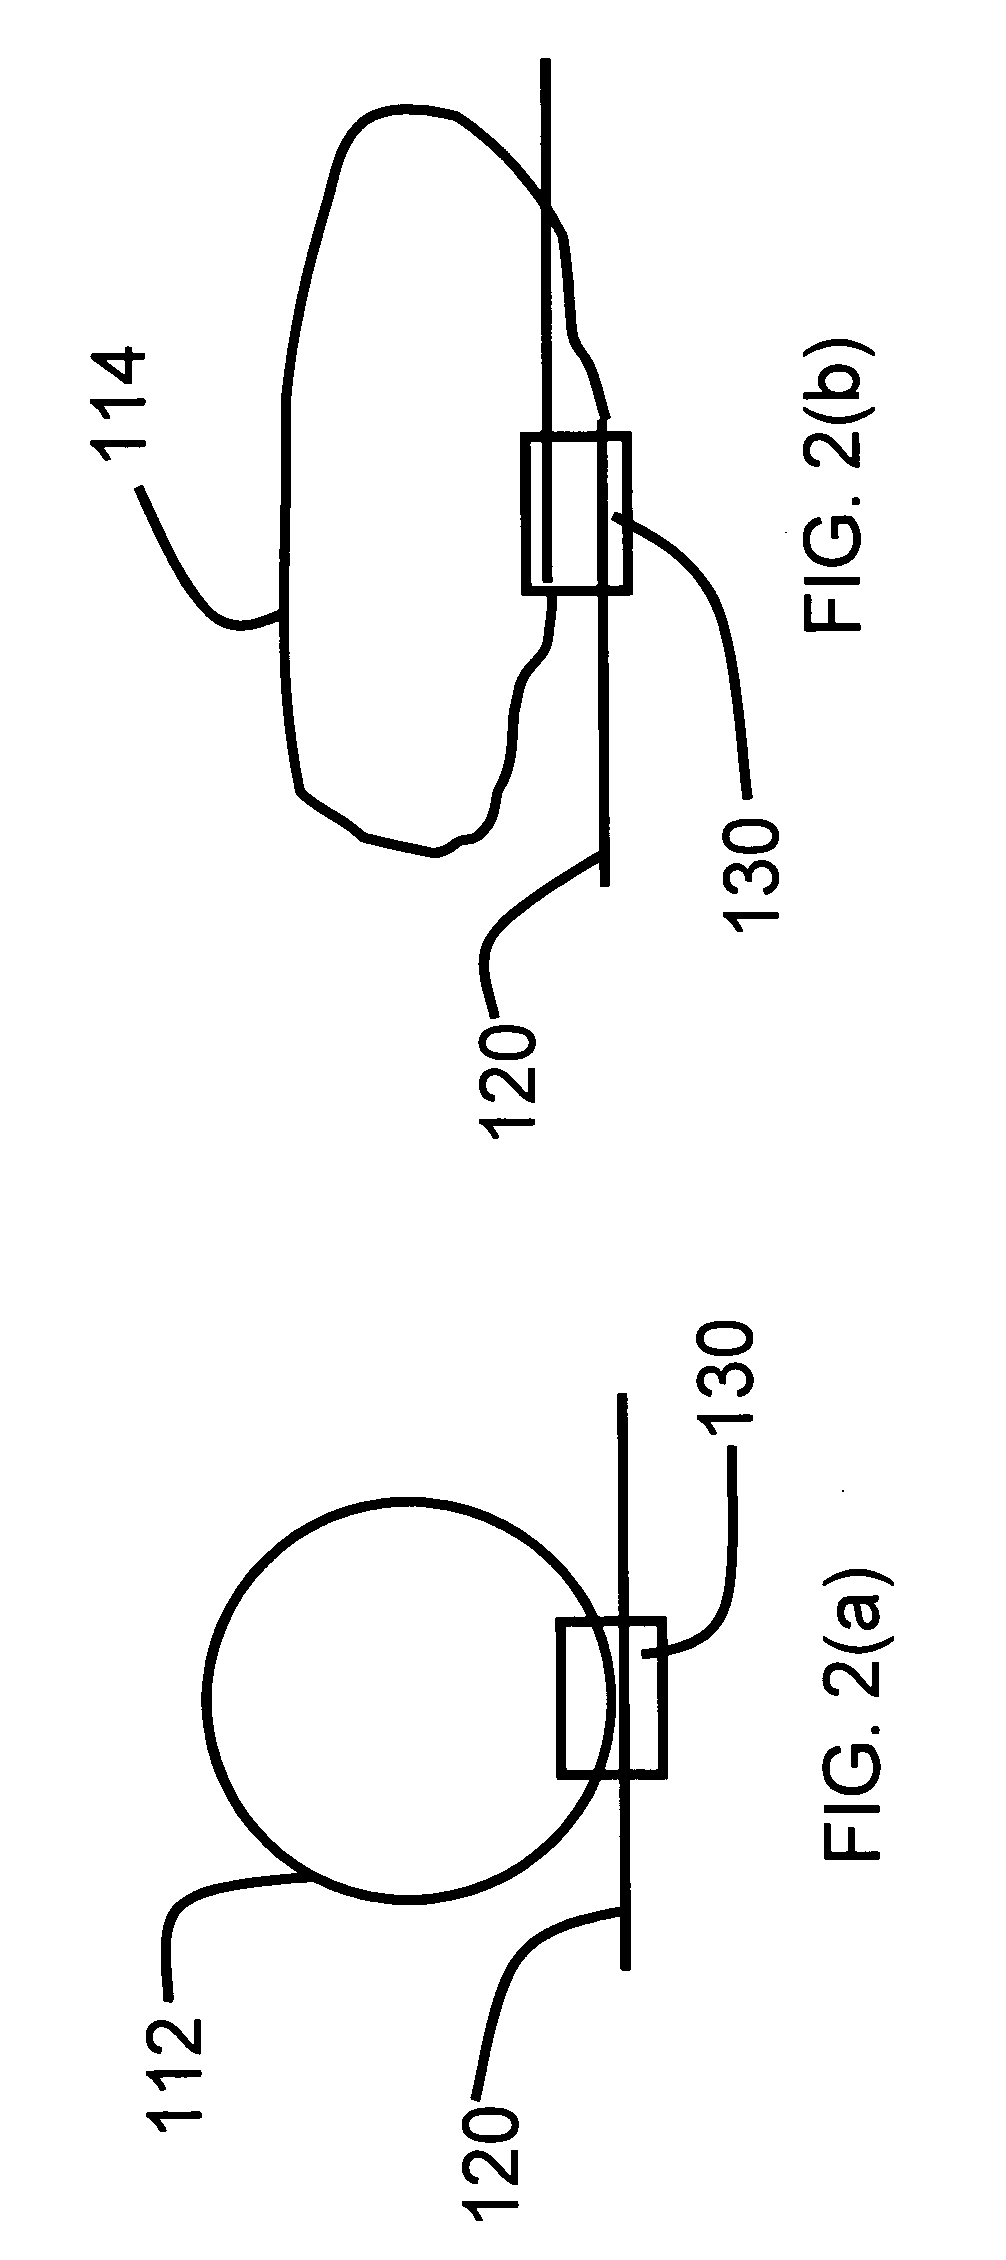 Method and apparatus for measuring and monitoring optical properties based on a ring-resonator